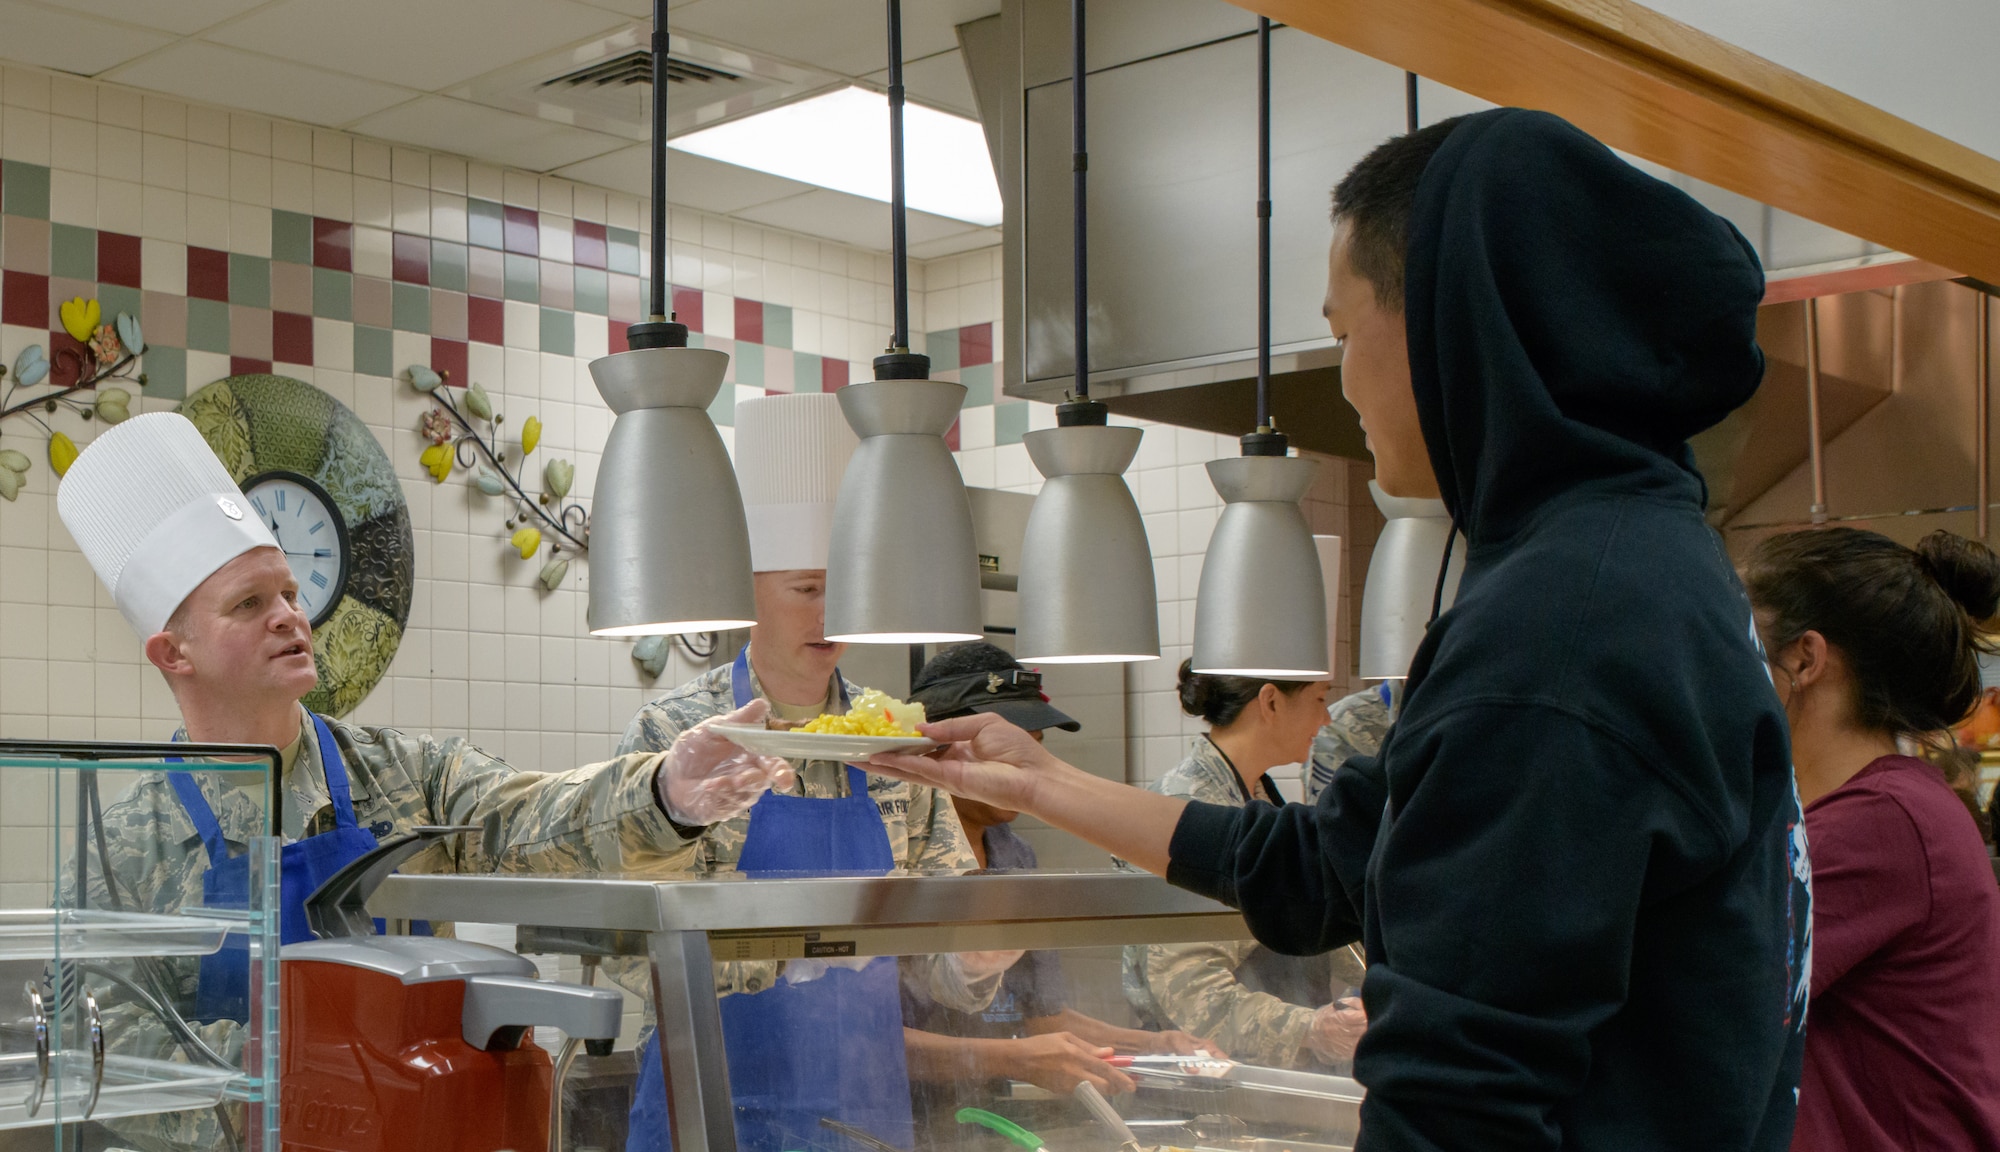 U.S. Air Force Master Sgt. Richard Stites, 334th Training Squadron first sergeant, serves Thanksgiving Day lunch to Airman 1st Class Maxim Tyan, 334th TRS student, inside the Azalea Dining Facility at Keesler Air Force Base, Mississippi, Nov. 22, 2018. It is tradition at Keesler for commanders, first sergeants and superintendents to take time out of their holiday to serve a Thanksgiving meal to technical training and permanent party Airmen. (U.S. Air Force photo by Andre' Askew)